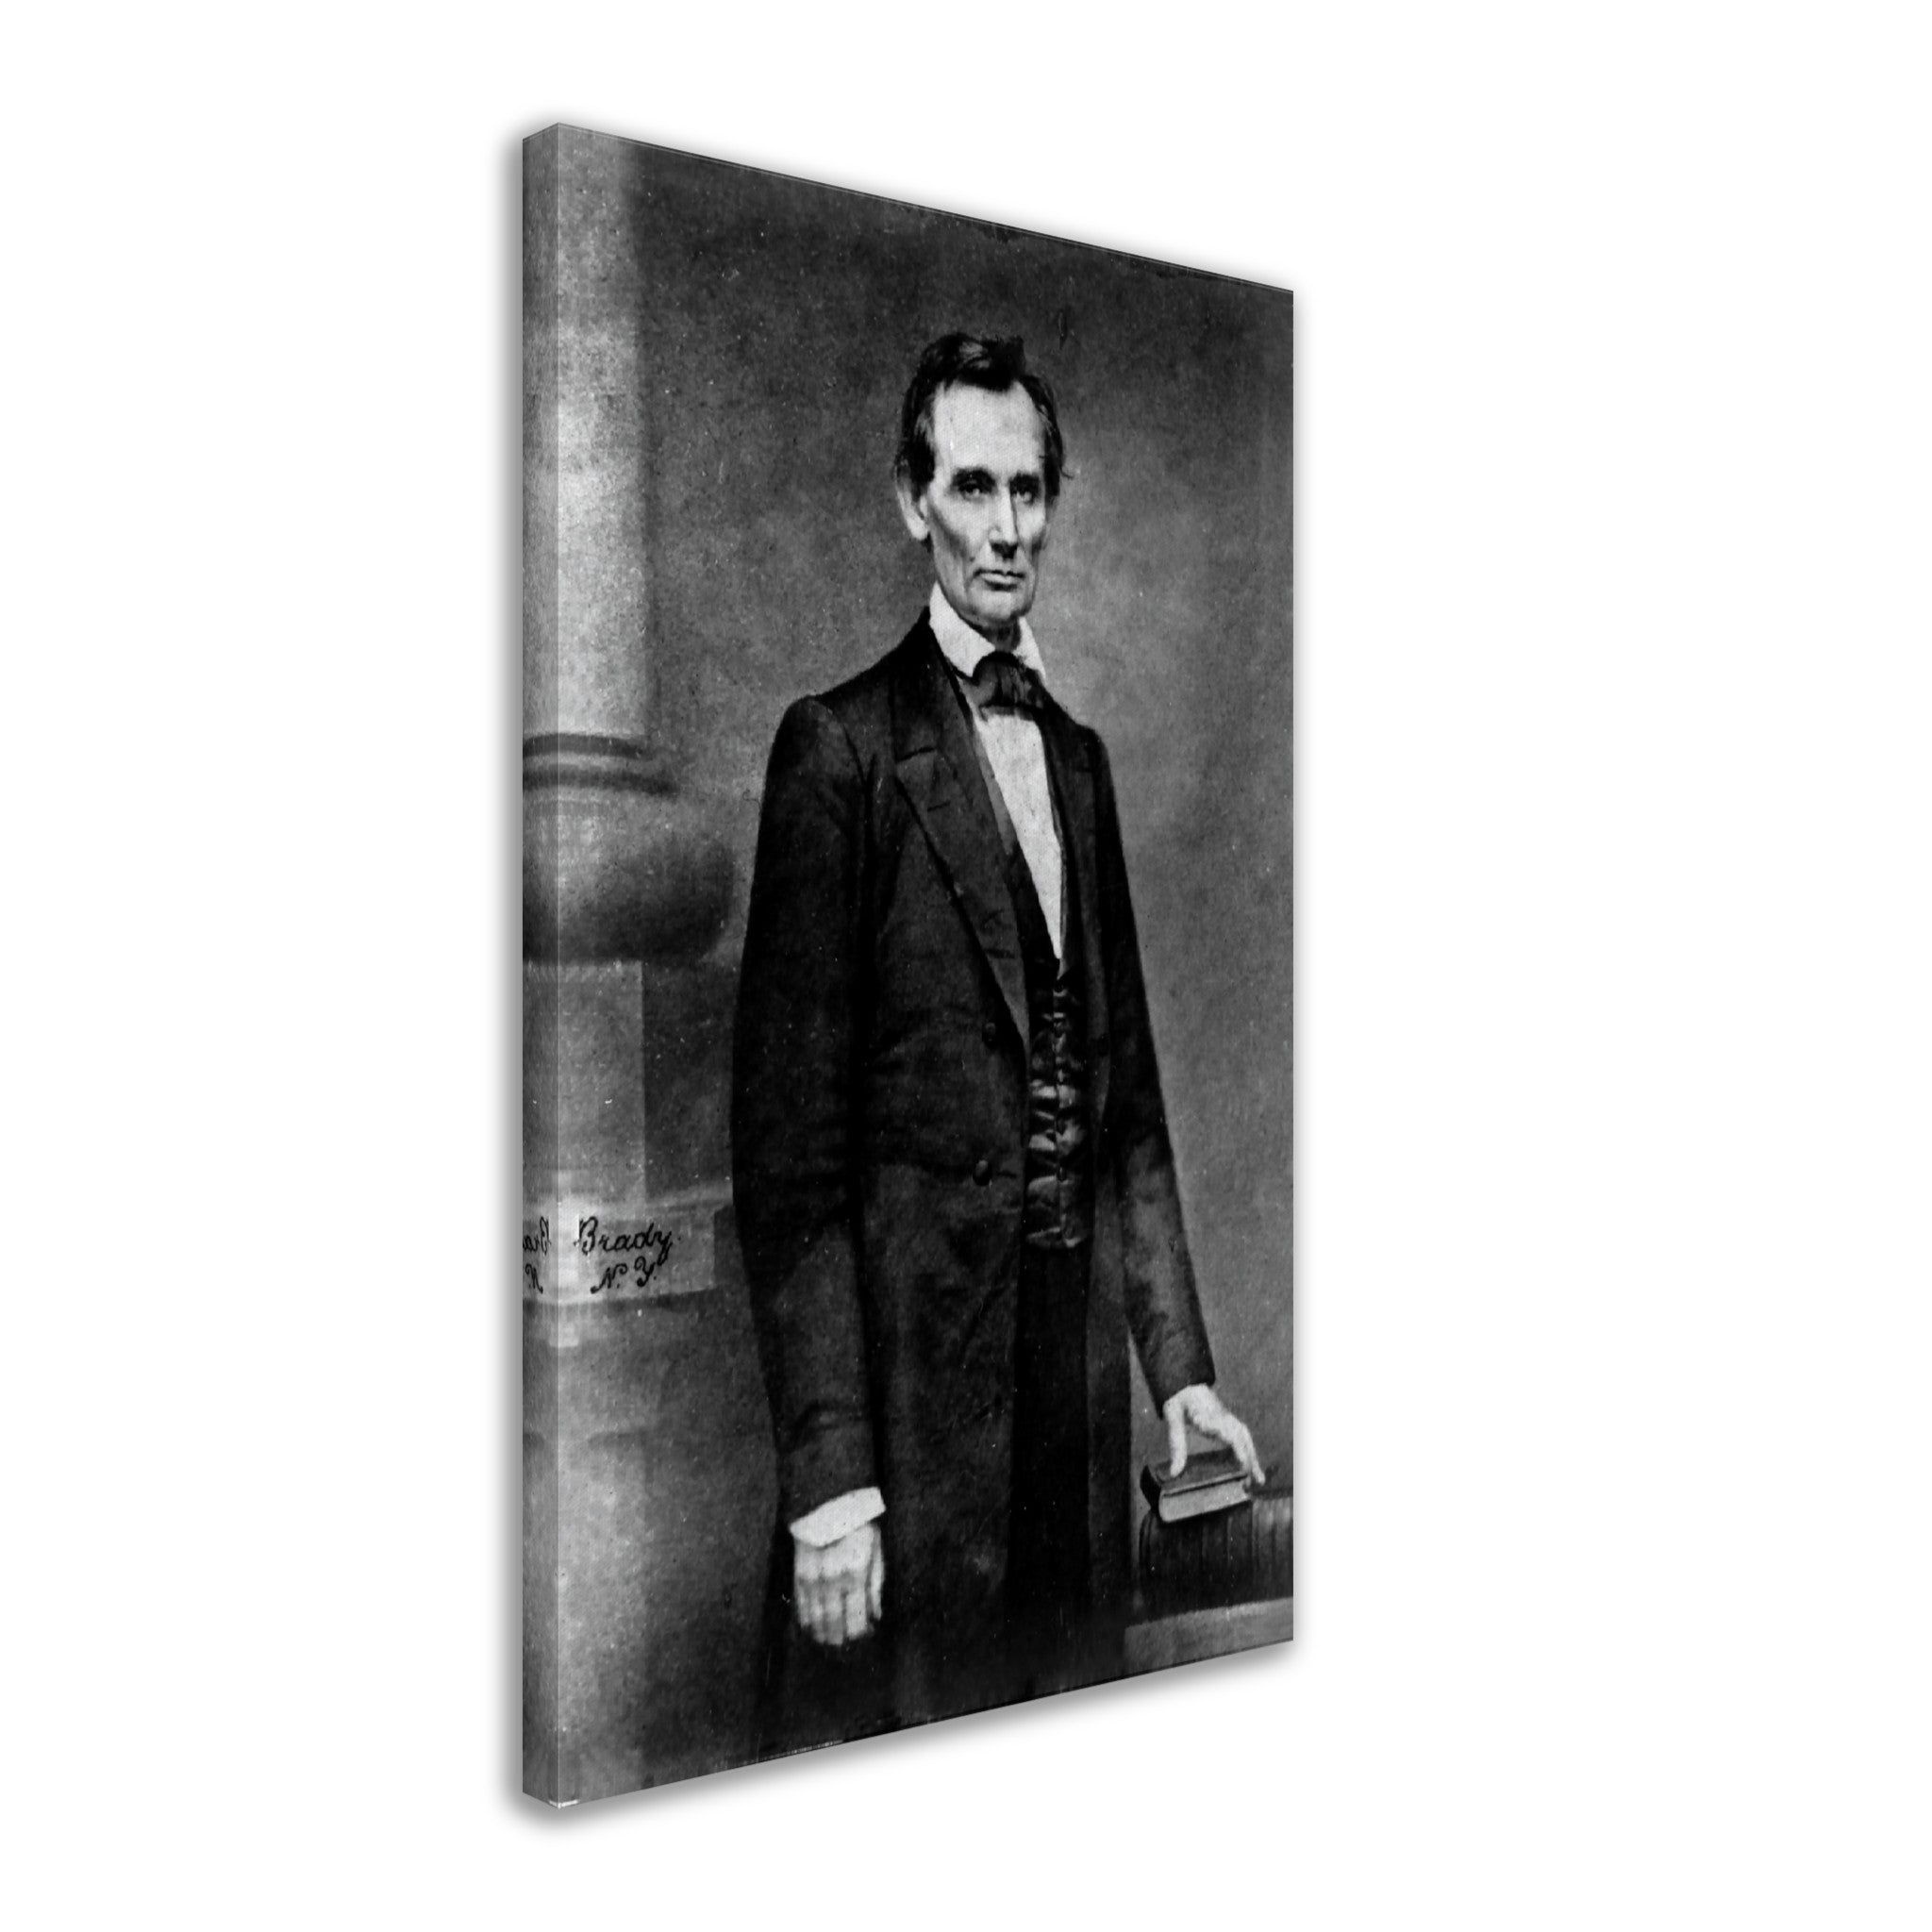 Abraham Lincoln Portrait Photo Canvas, Famous Canvas Print Photo From 1860, Photo That Propelled Lincoln To Greatness - WallArtPrints4U